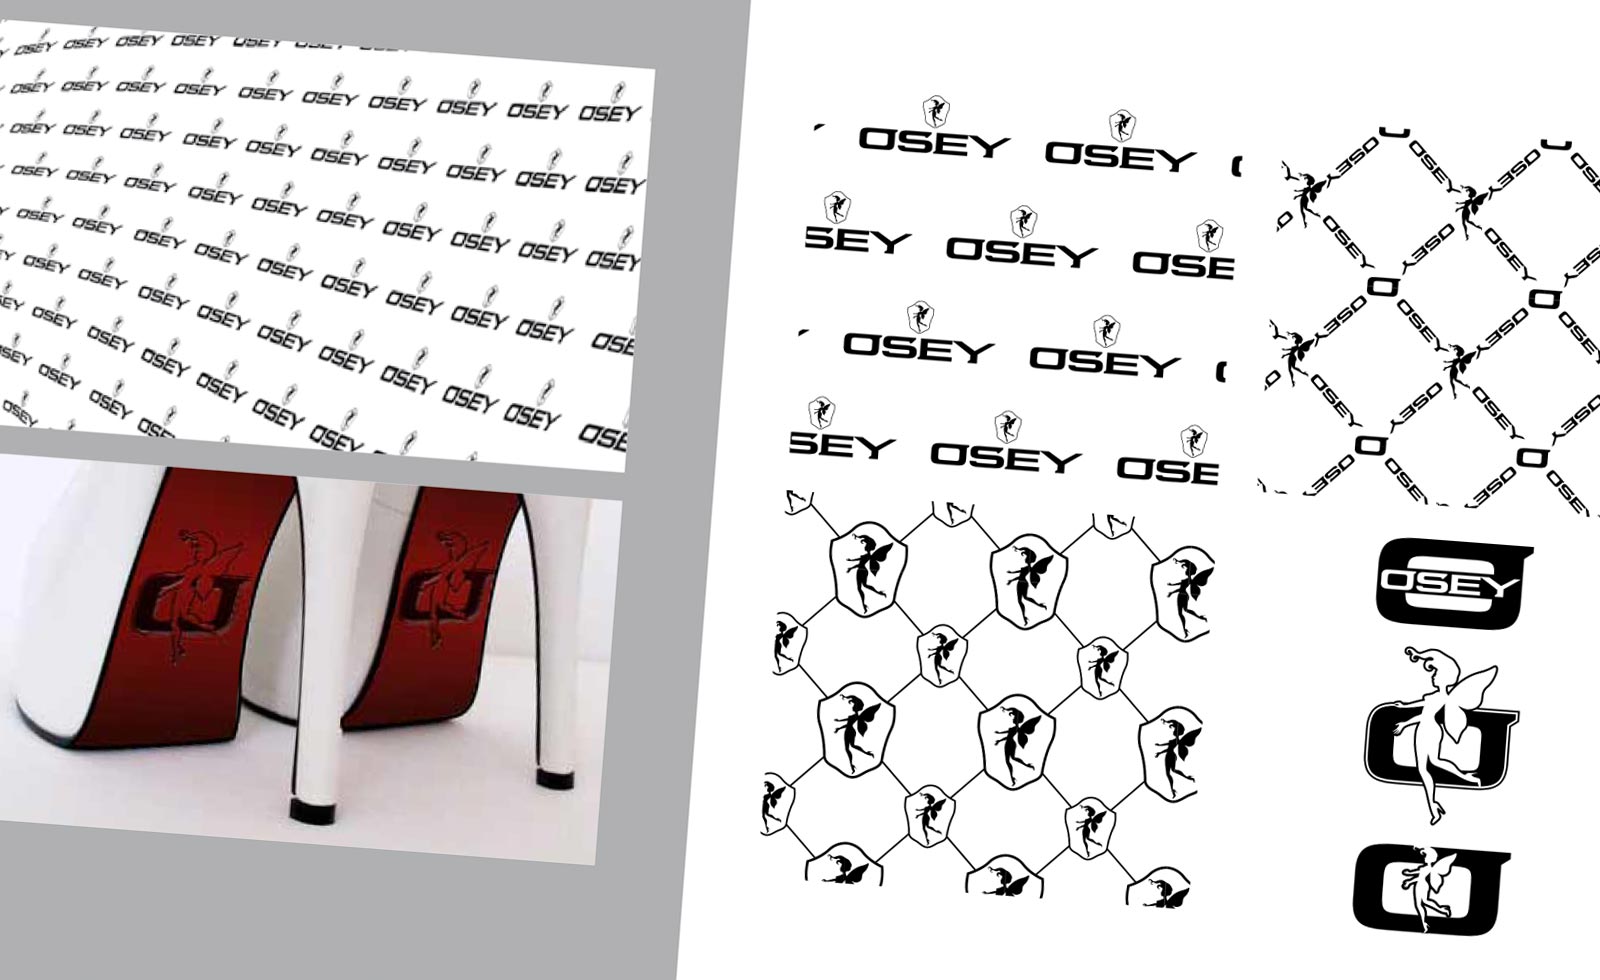 obey o6 shoes rebranding redesign brandbook guidelines applications